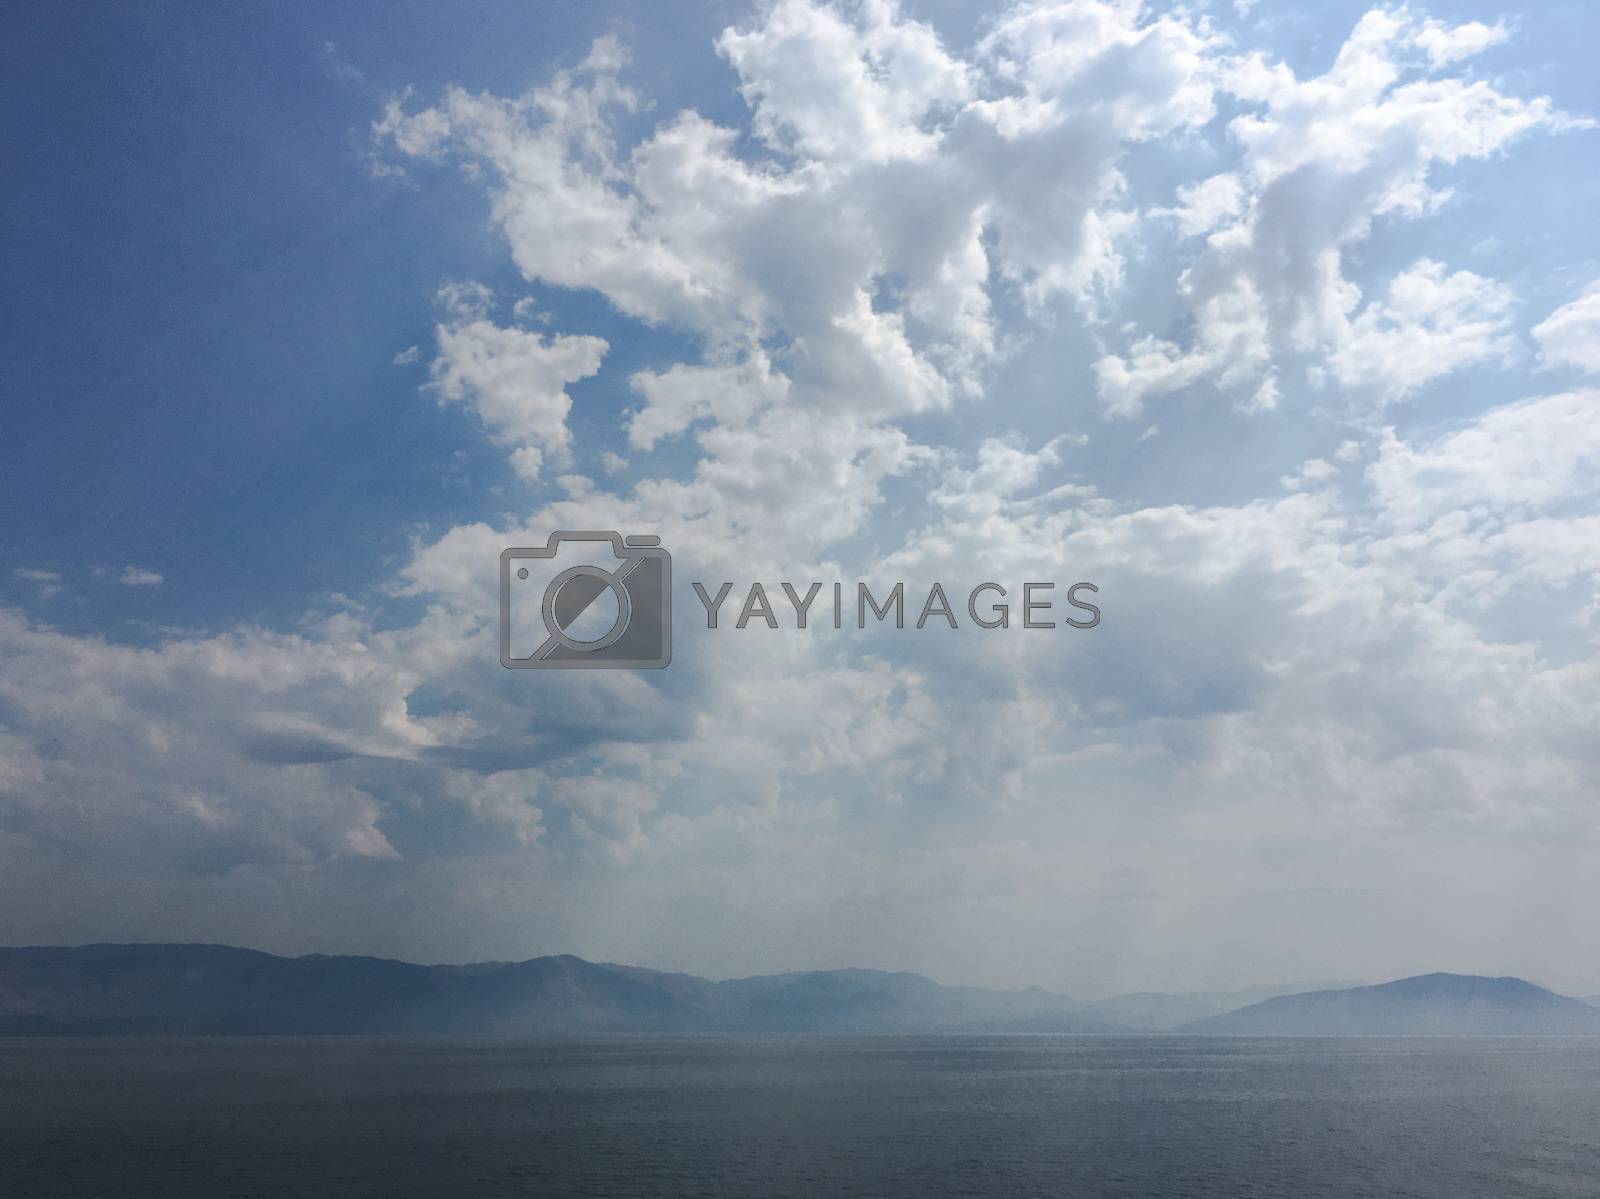 Royalty free image of beautiful blue sky with clouds background.Sky with clouds weather nature cloud blue.Blue sky with clouds and sun. by titco